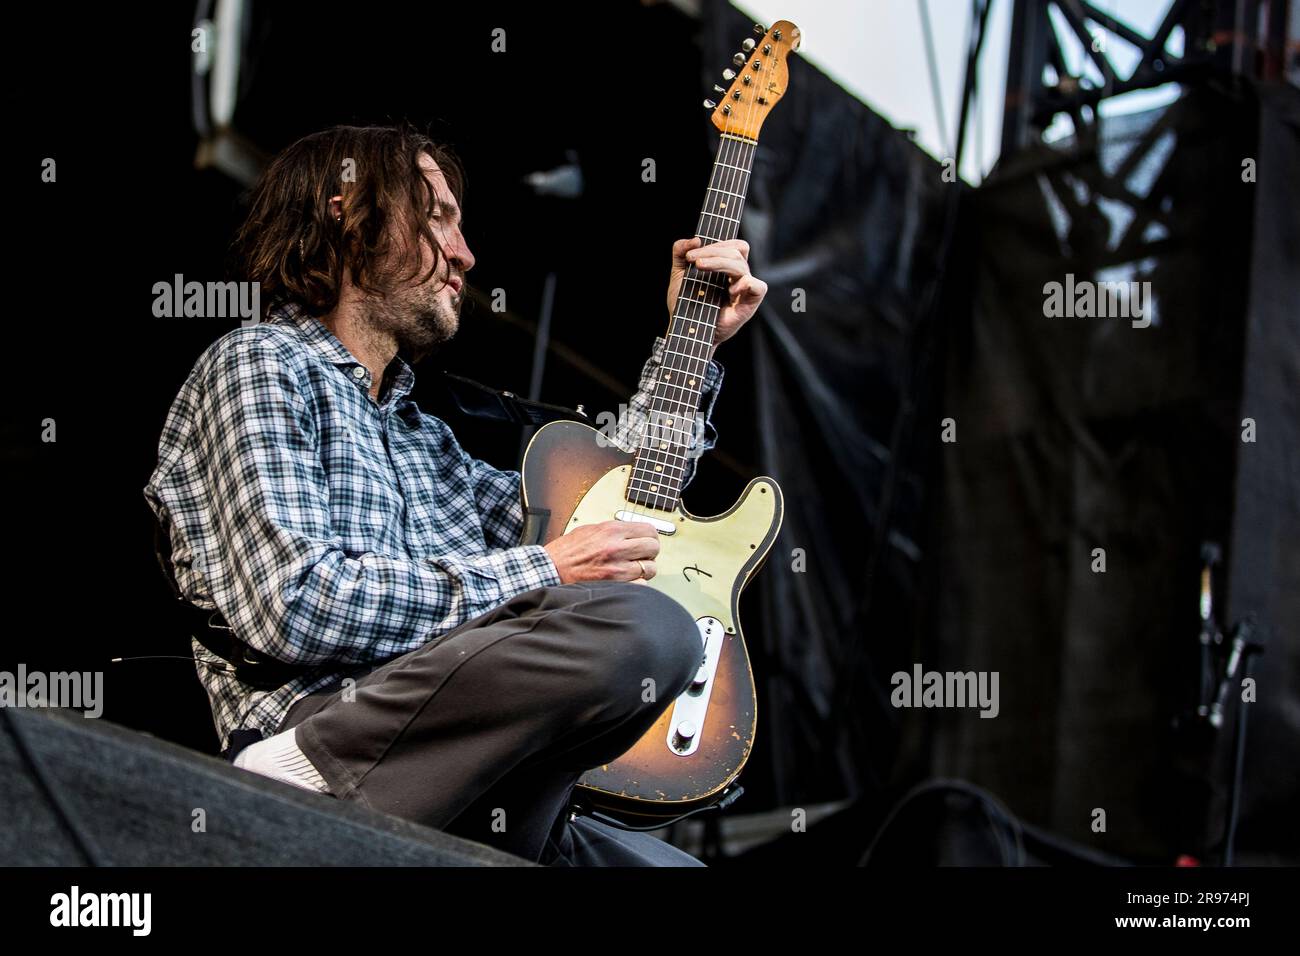 Odense, Denmark. 24th June, 2023. The American rock band Red Hot Chili Peppers performs a live concert during the Danish music festival Tinderbox 2023 in Odense. Here guitarist John Frusciante is seen live on stage. (Photo Credit: Gonzales Photo/Alamy Live News Stock Photo